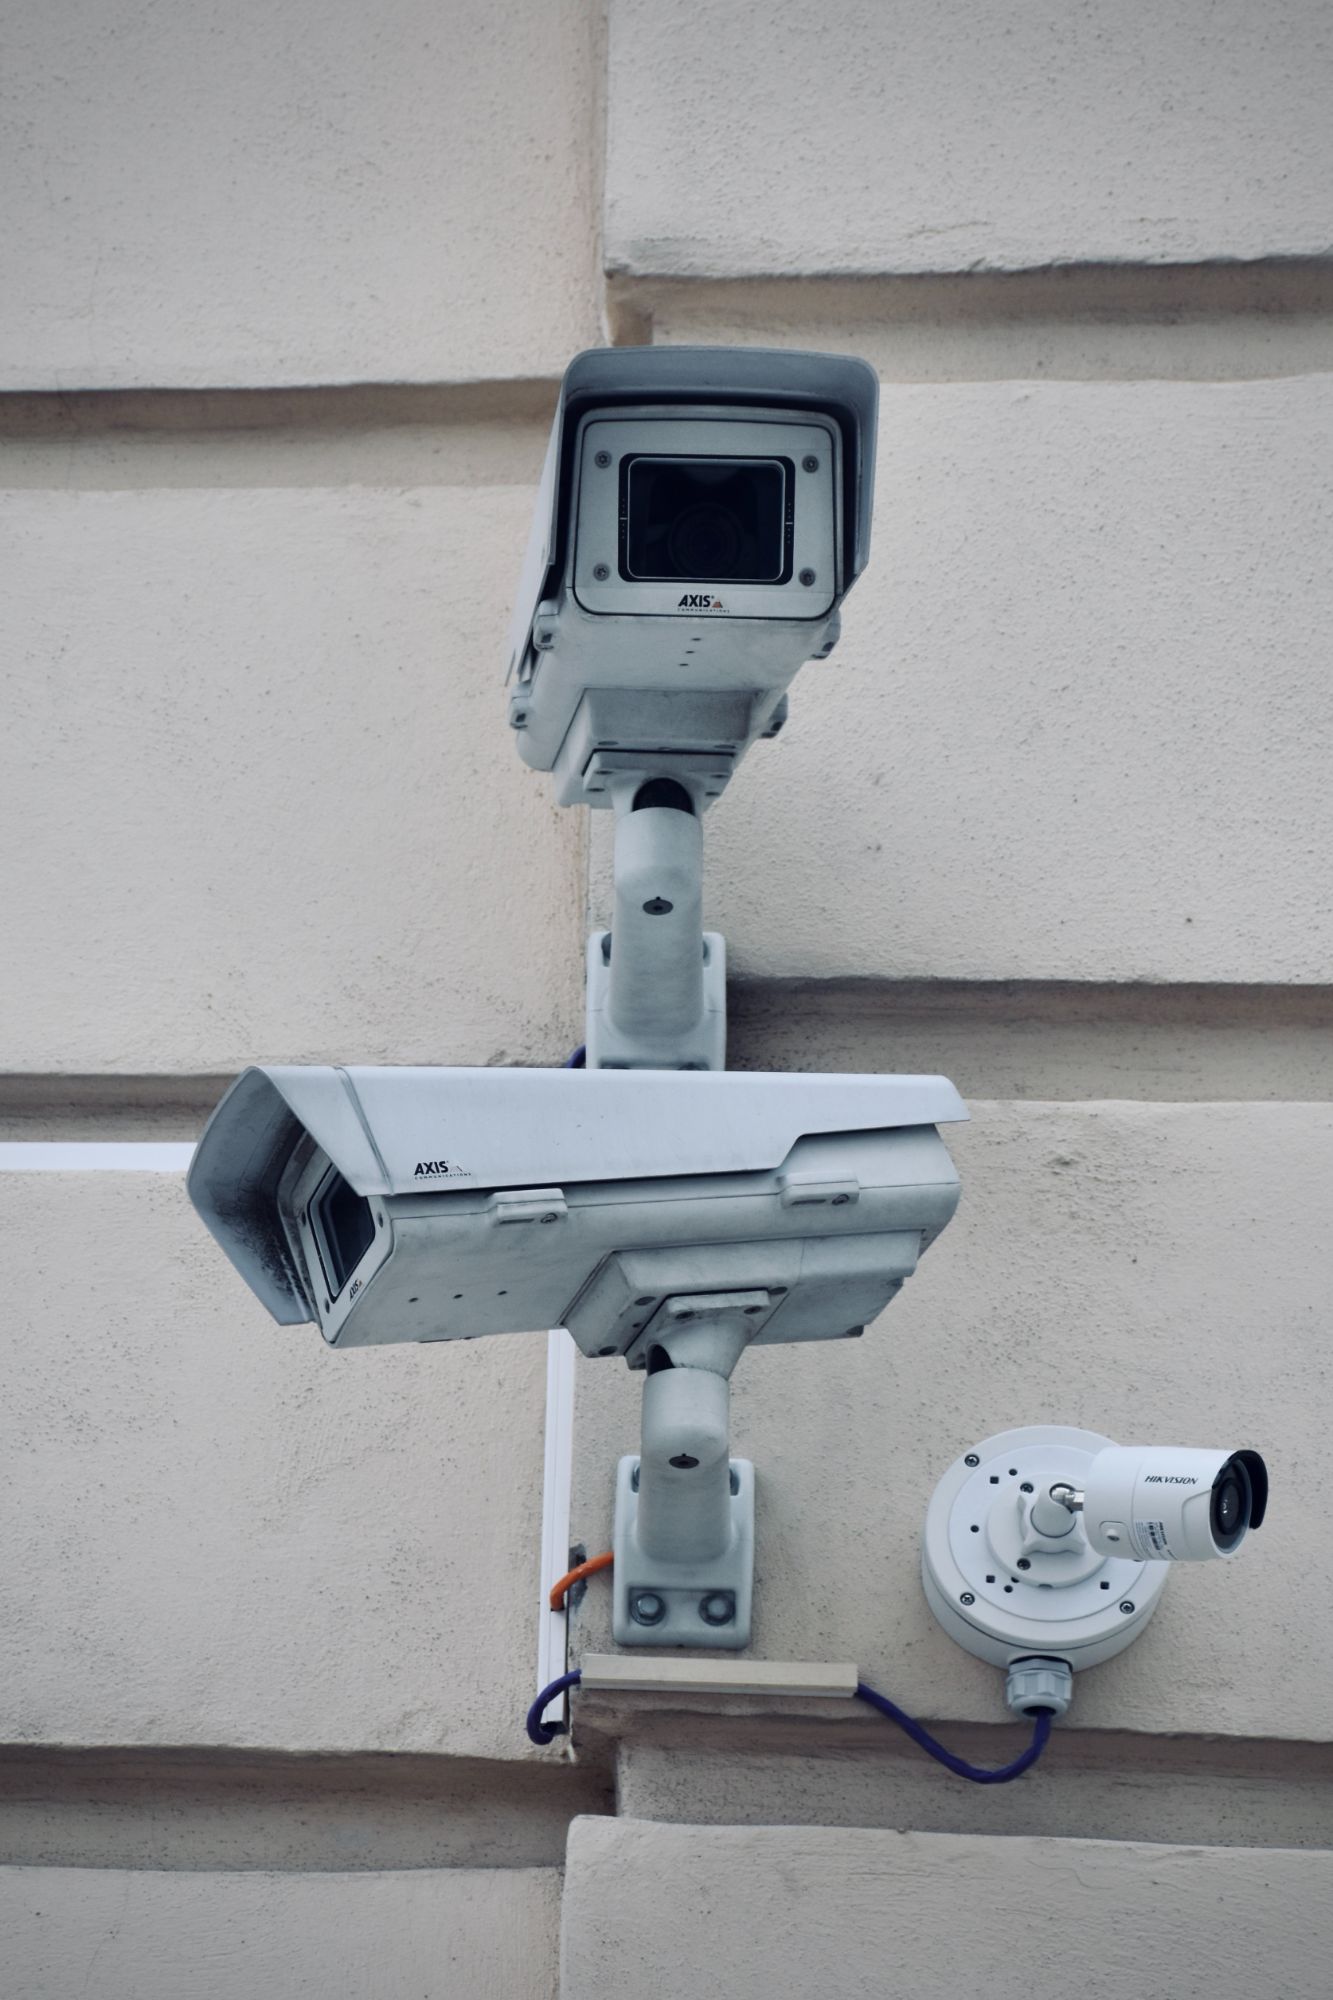 learn how to use CCTV footage for intelligence purposes - course